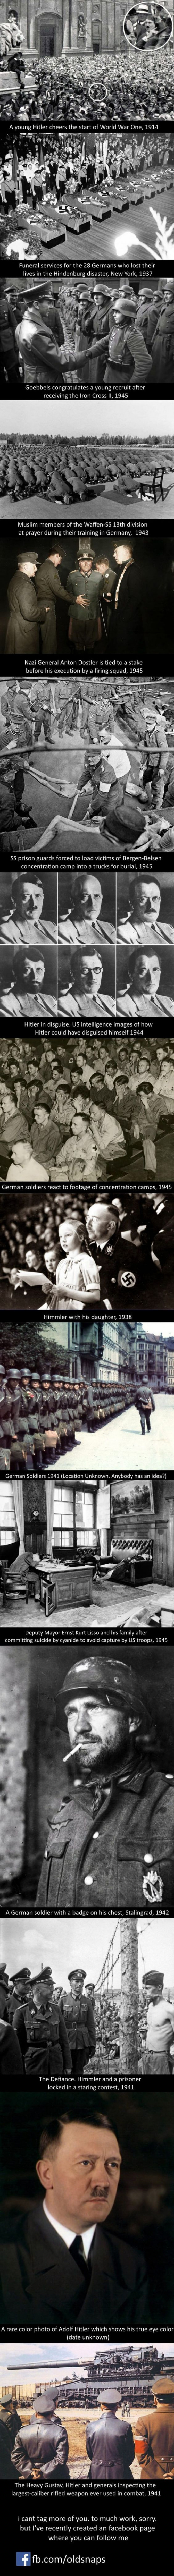 Old Photos Of Nazis You Probably Never Saw